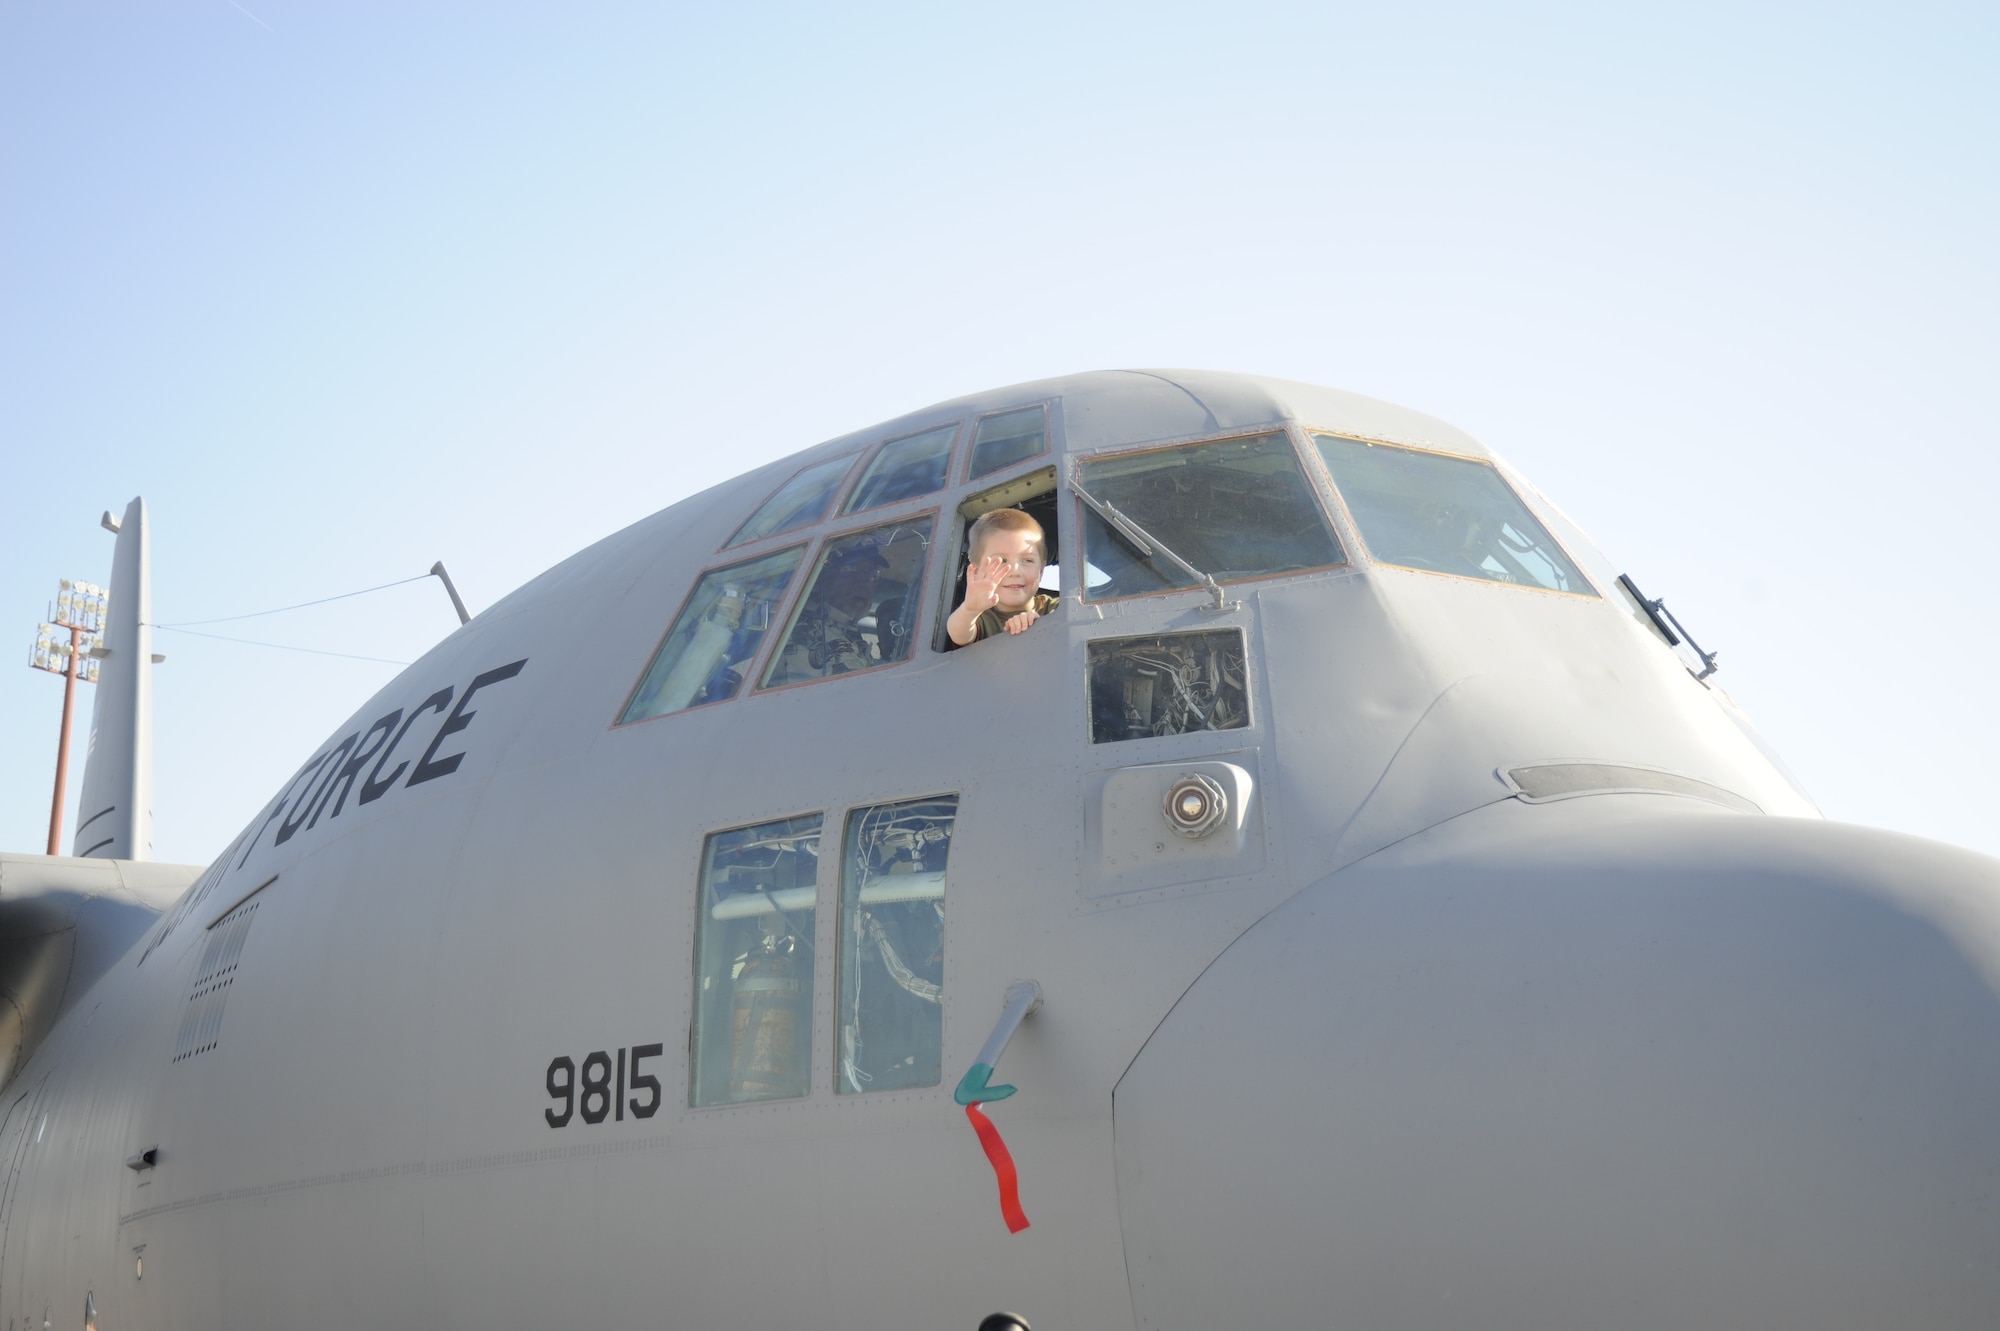 Jacob Jackson, a 5-year-old, waves to people from a C-130 Hercules during the first day of Airpower over Hampton Roads, a three-day airshow culmination of Air Force Week April 24 at Langley Air Force Base, Va. (Defense Department photo/Master Sgt. Ben Gonzales)